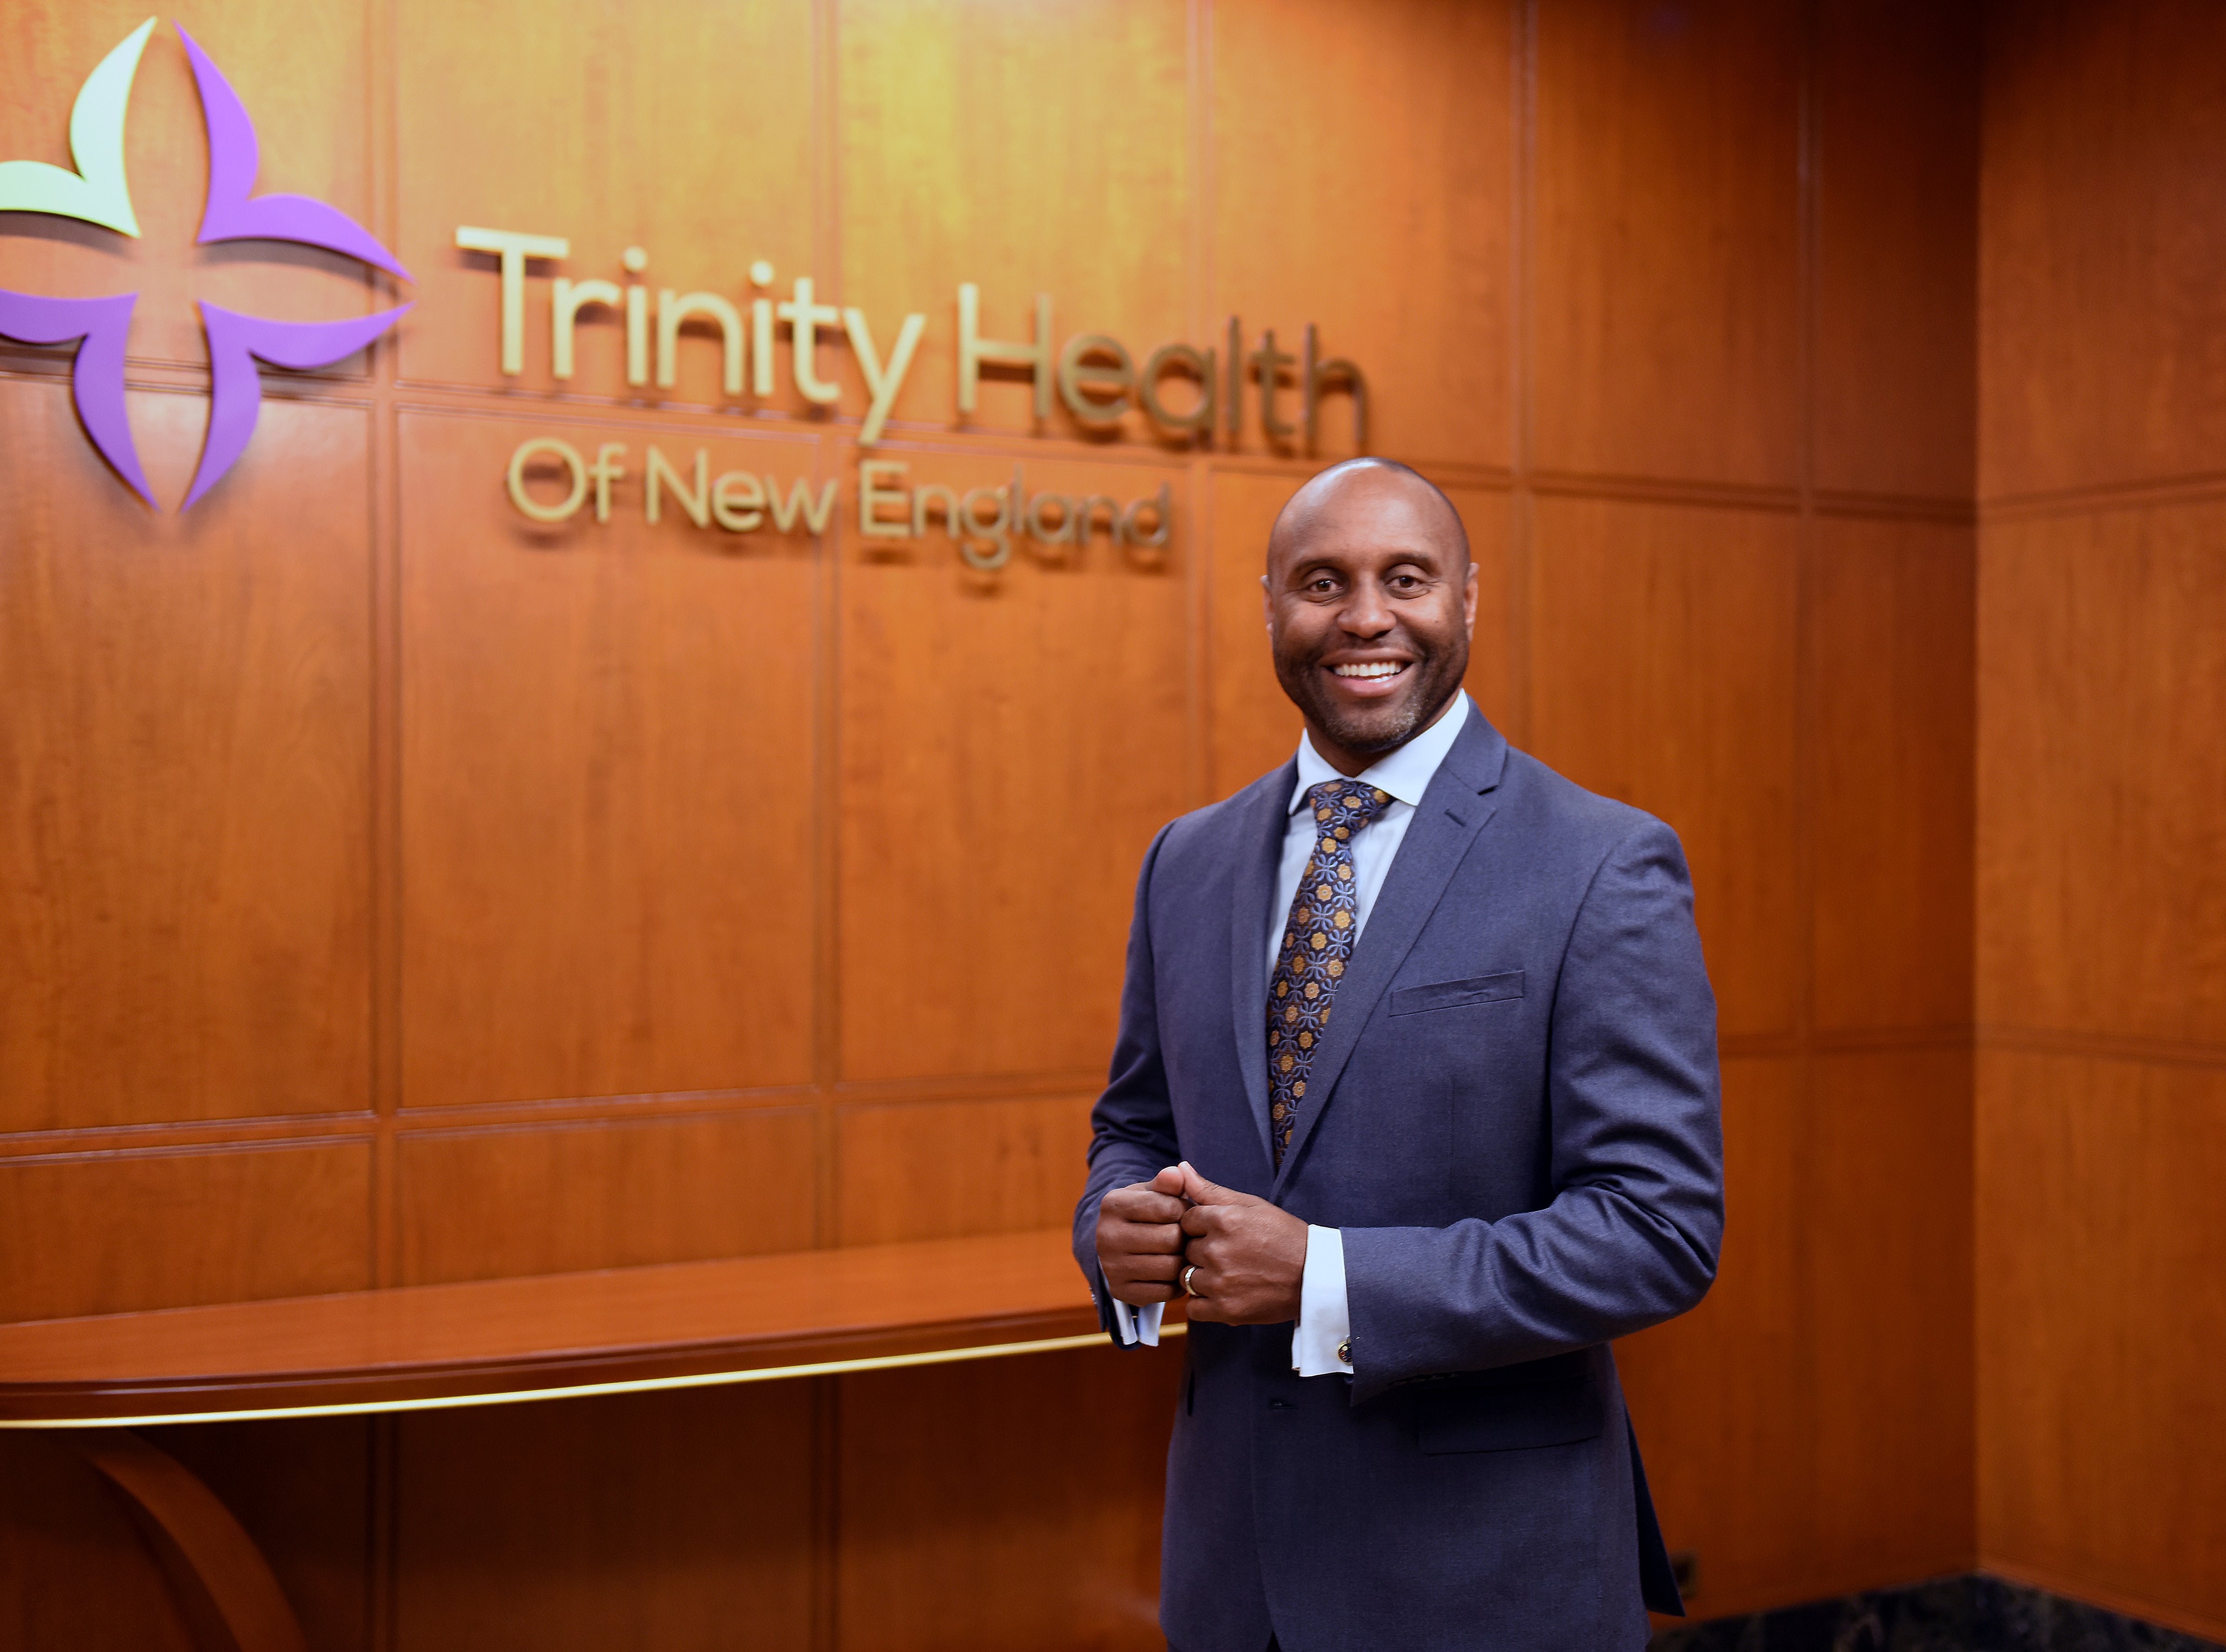 Dr. Reginald Eadie, president and CEO of Trinity Health of New England, who has been working to build trust in the new coronavirus vaccines among members of Black American communities. (Courtesy Trinity Health of New England)